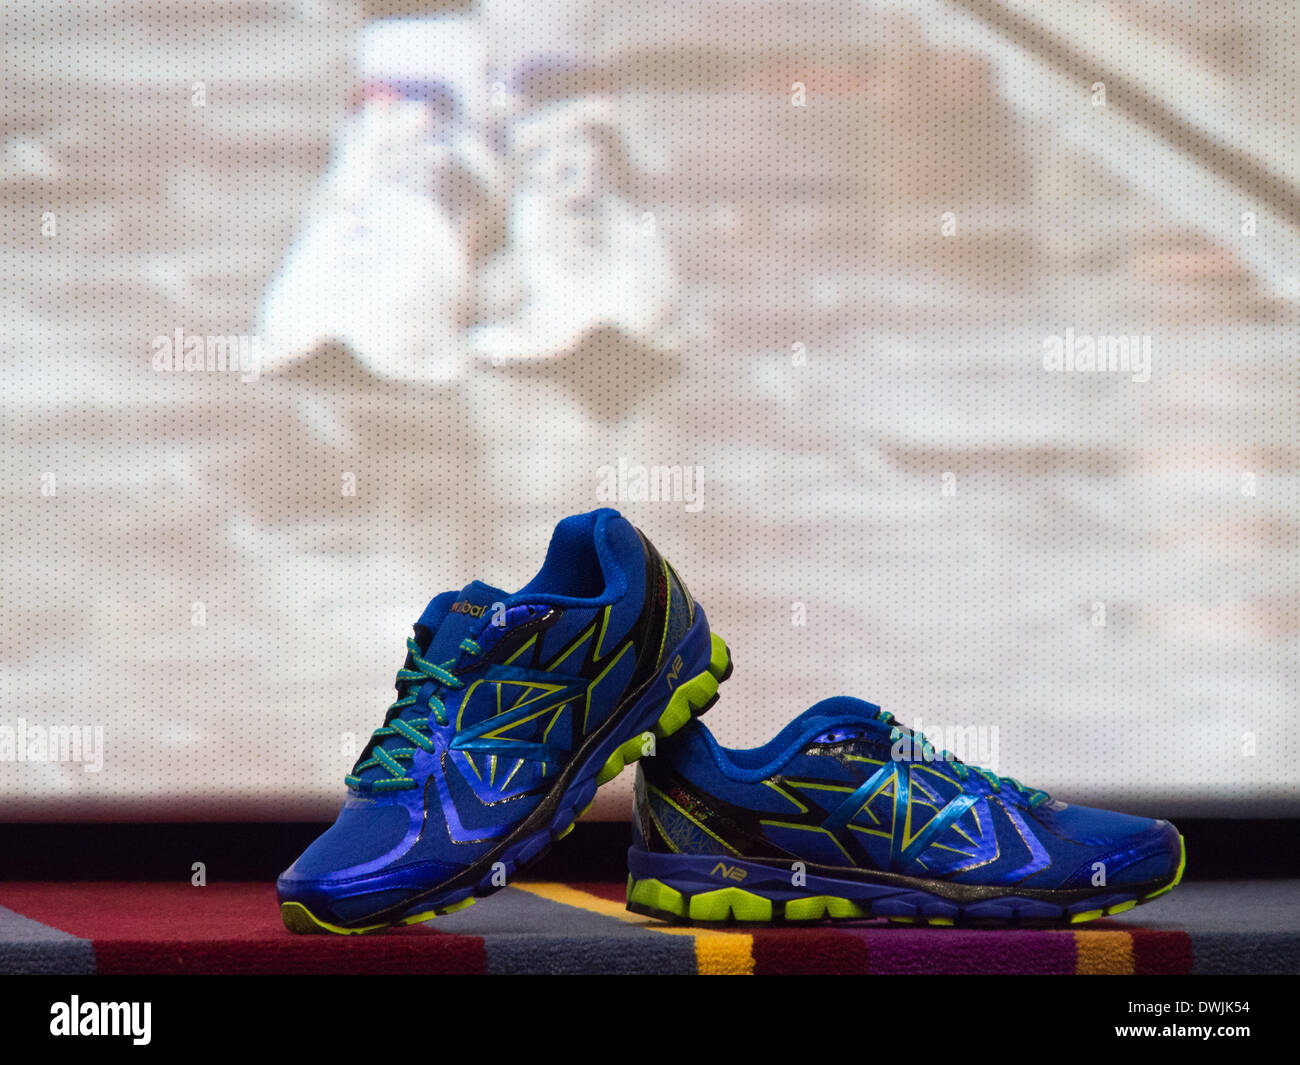 Jerusalem, Israel. 10th March, 2014. A pair of New Balance running shoes on  display as Jerusalem Mayor announces the 2014 International Marathon set to  take place March 21st with the expected participation